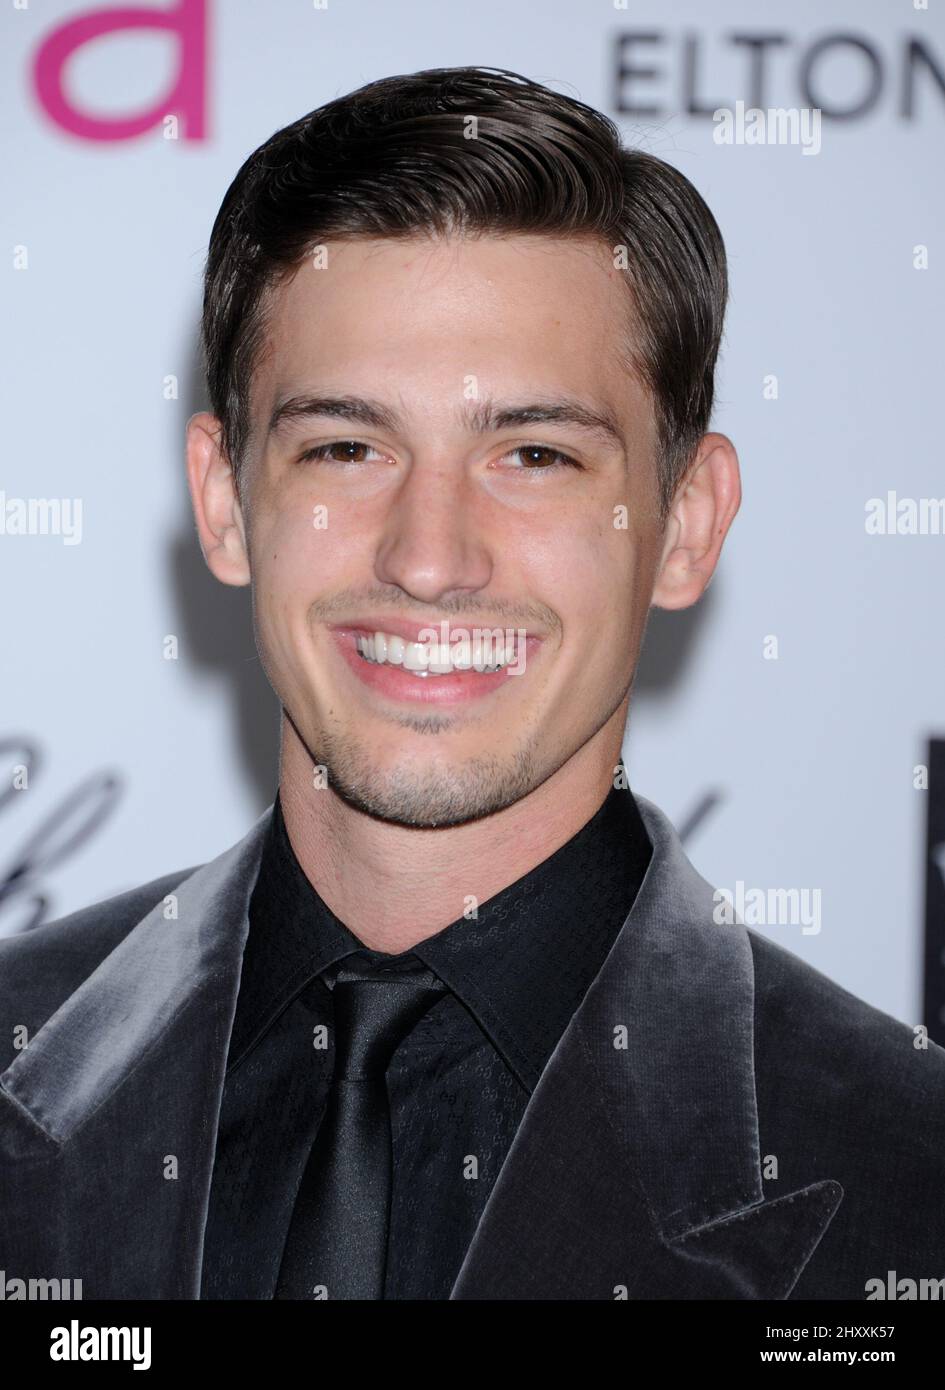 Asher Book at the Elton John AIDS Foundation Academy Awards viewing party in West Hollywood Park, California Stock Photo